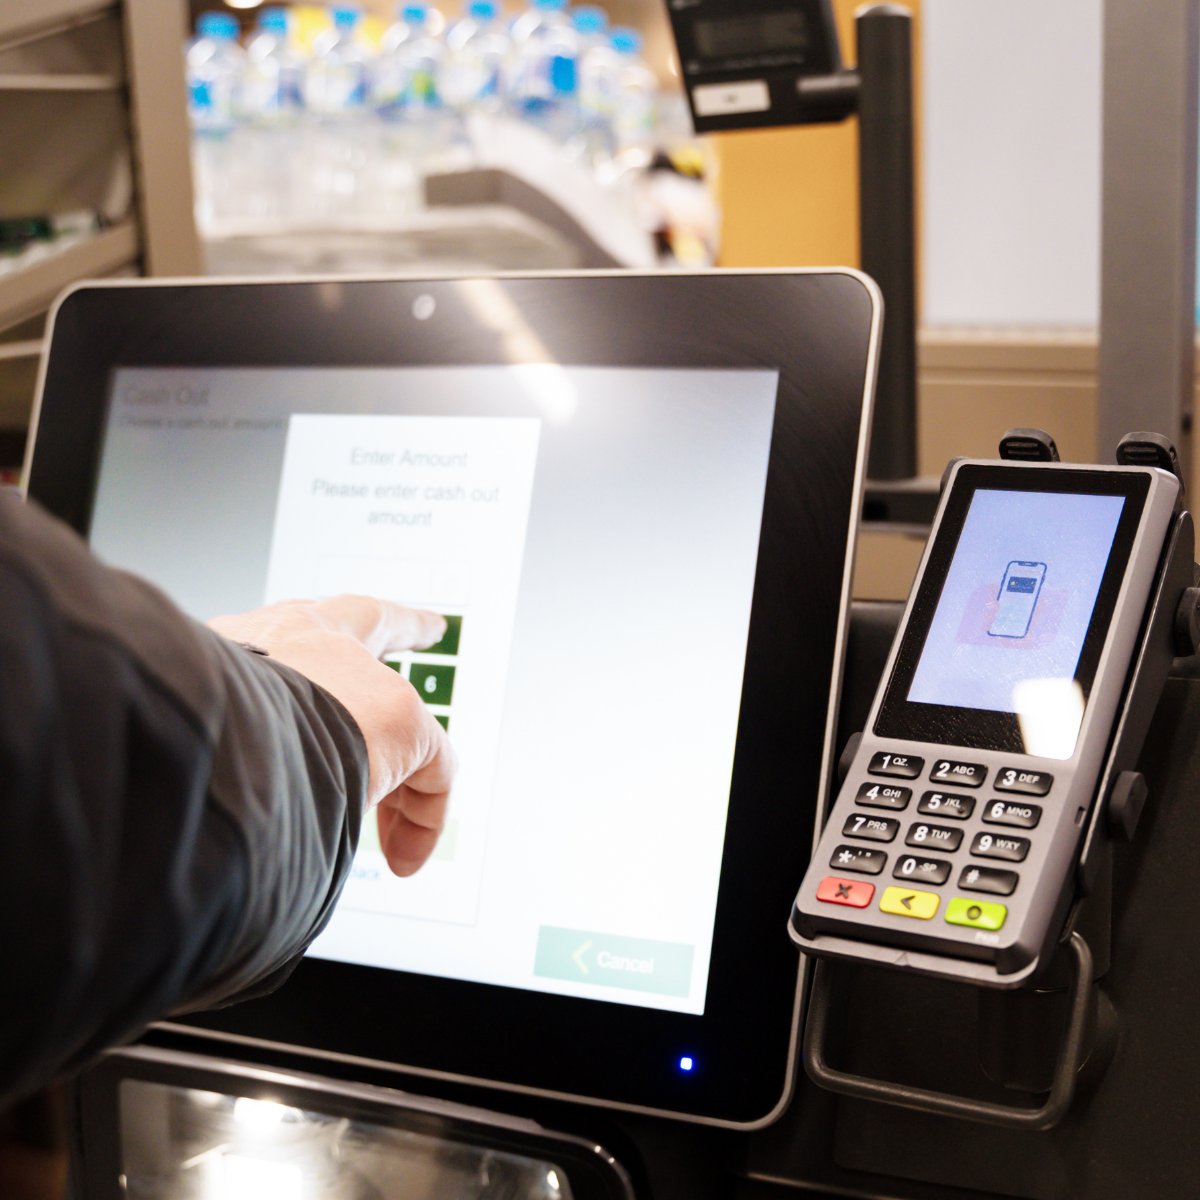 Self-checkout at the grocery store could be adding to the loneliness problem